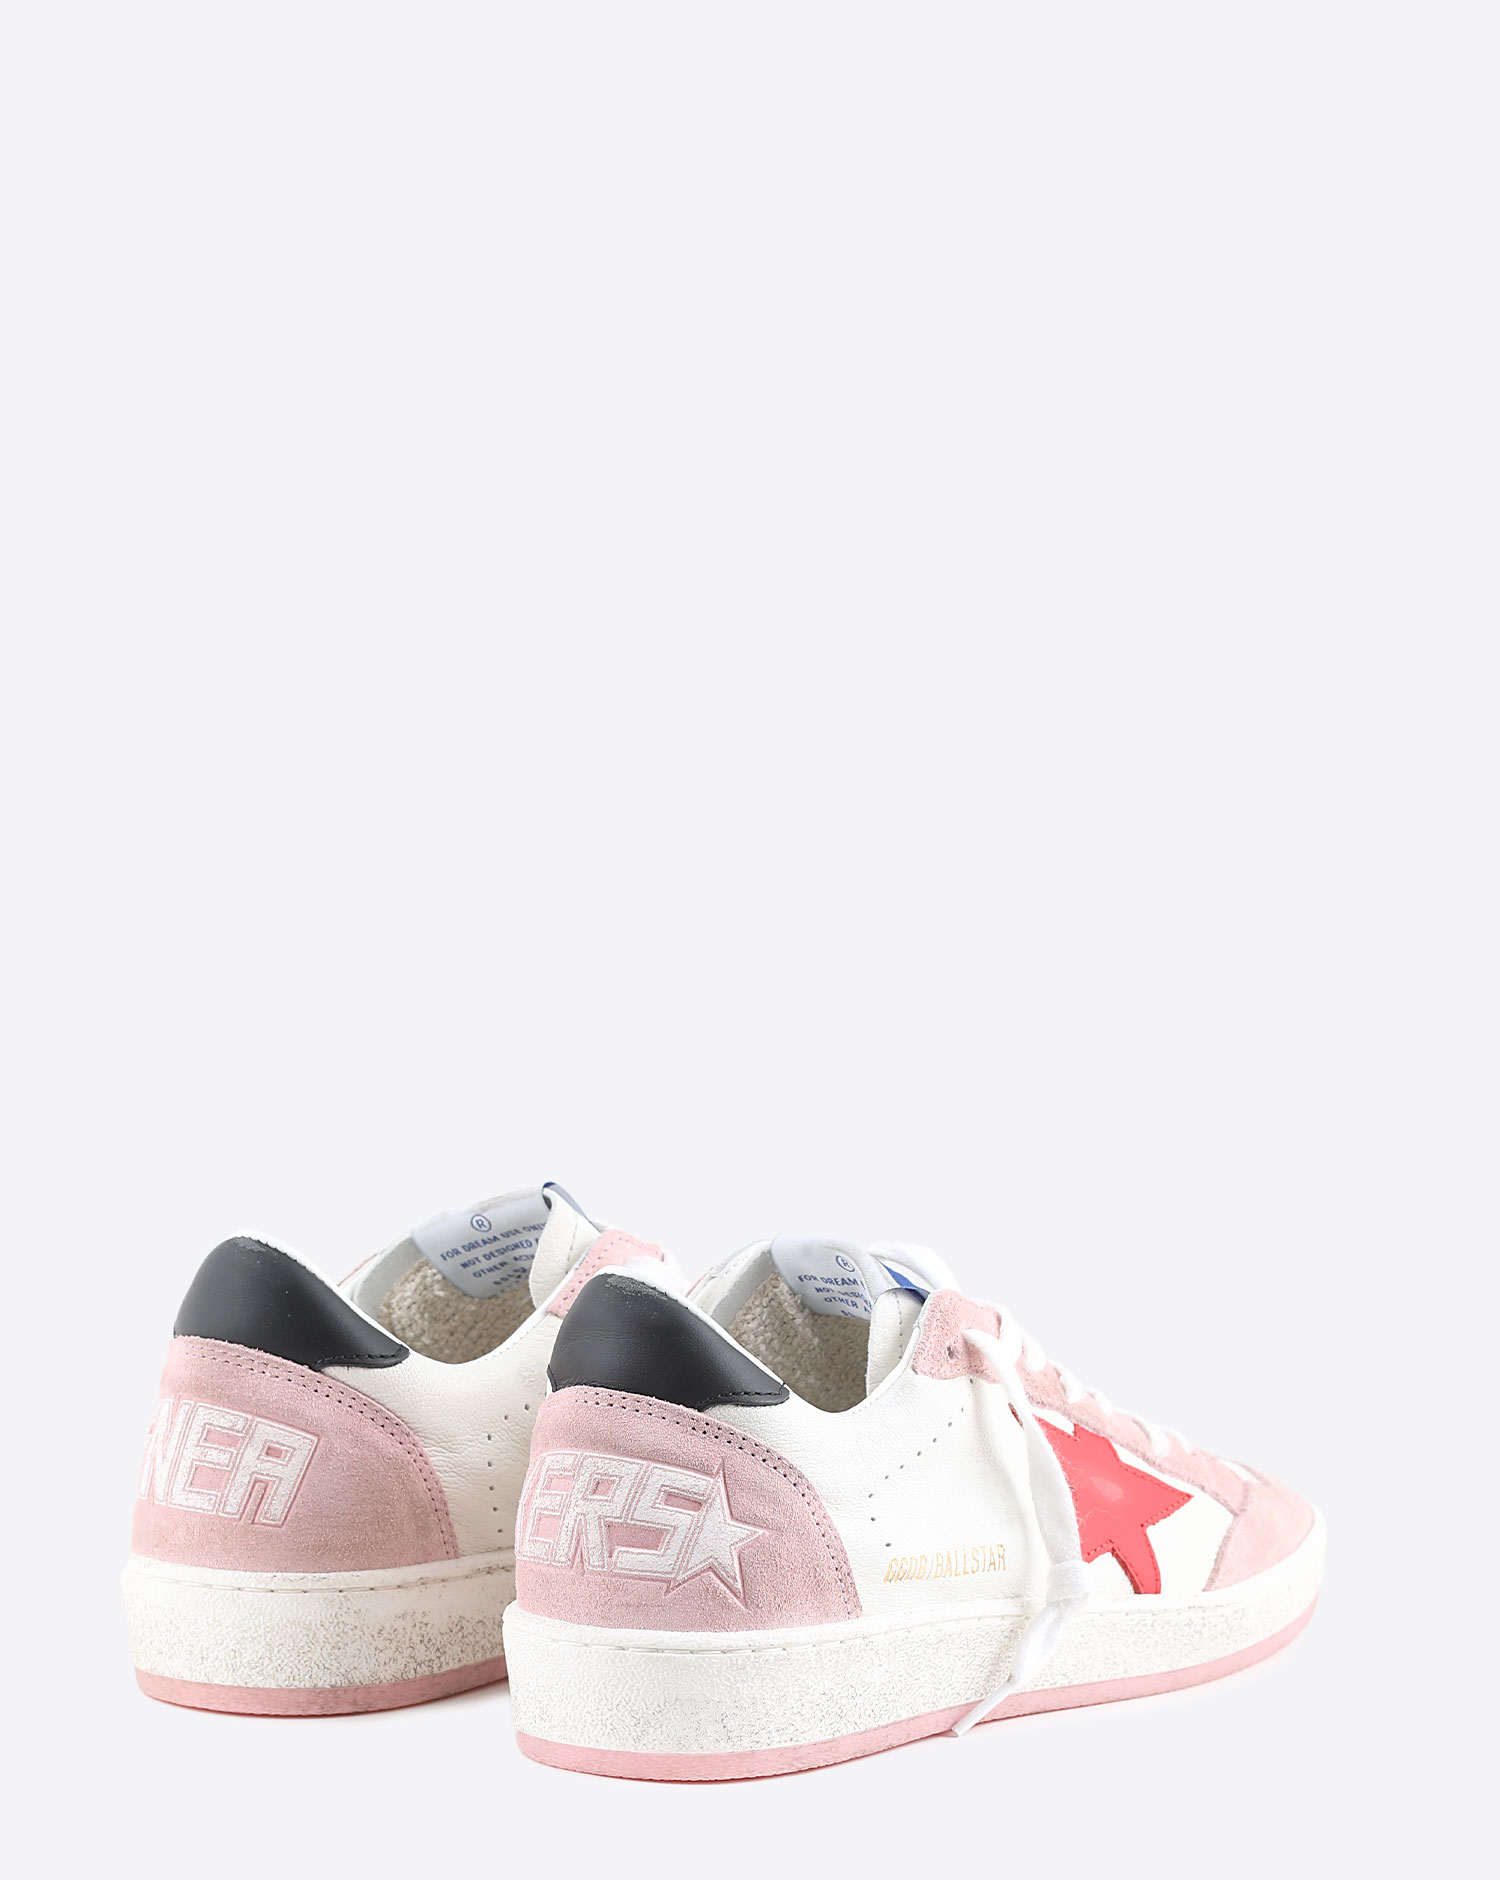 Sneakers Golden Goose Ball Star - White Pink Red Black 10880